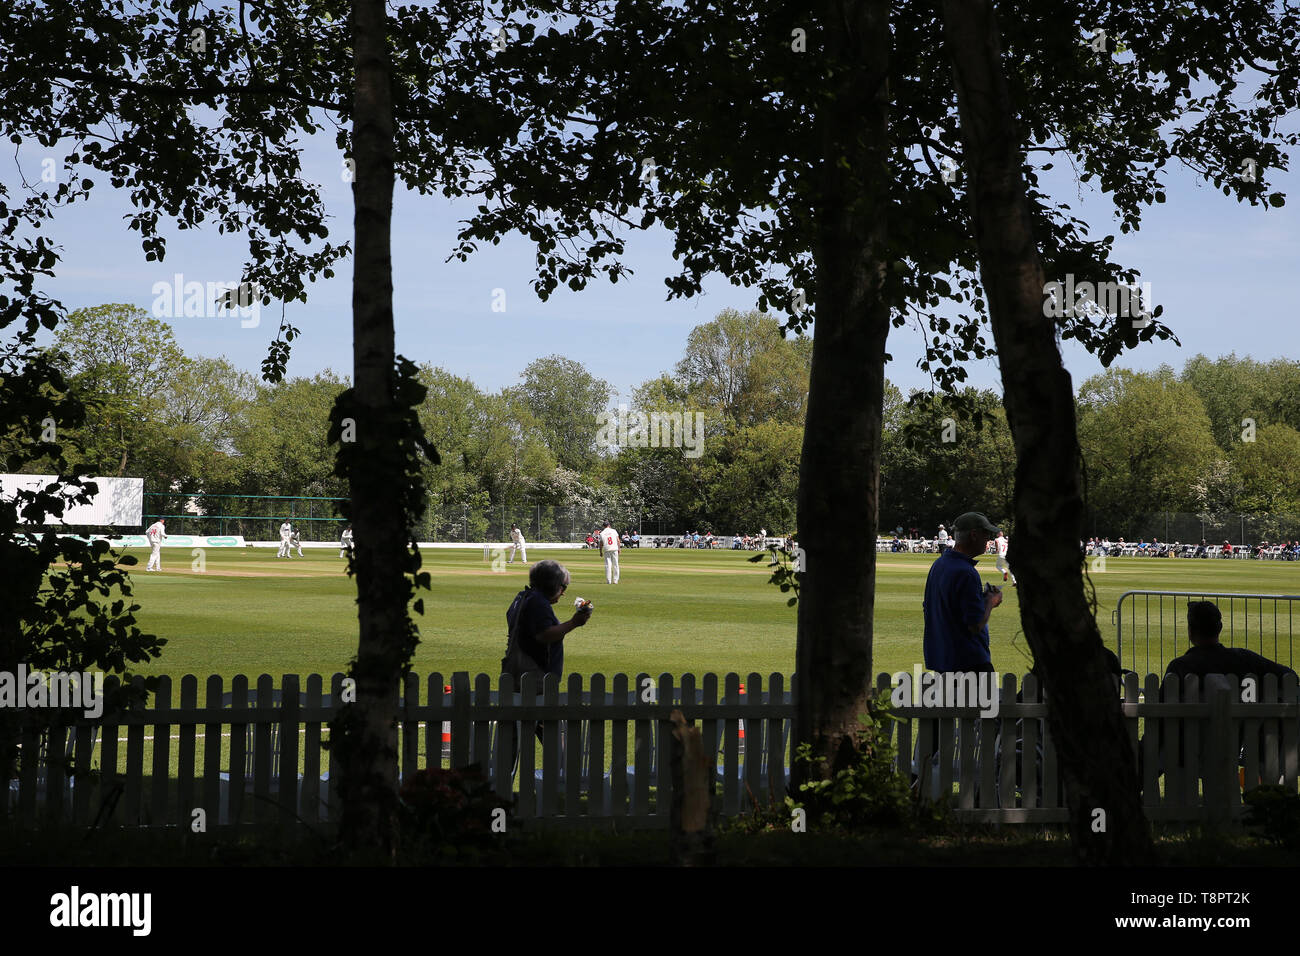 Newport, UK. 14th May, 2019. a general view during the Glamorgan CC v Gloucestershire CC, Specsavers county championship 4 day match, day 1 on Tuesday 14th May 2019 at Spytty Park in Newport, South Wales. This historic match is the first time in 54 years that a 1st class Cricket match has been held in Newport. pic by Andrew Orchard/Andrew Orchard sports photography Credit: Andrew Orchard sports photography/Alamy Live News Stock Photo